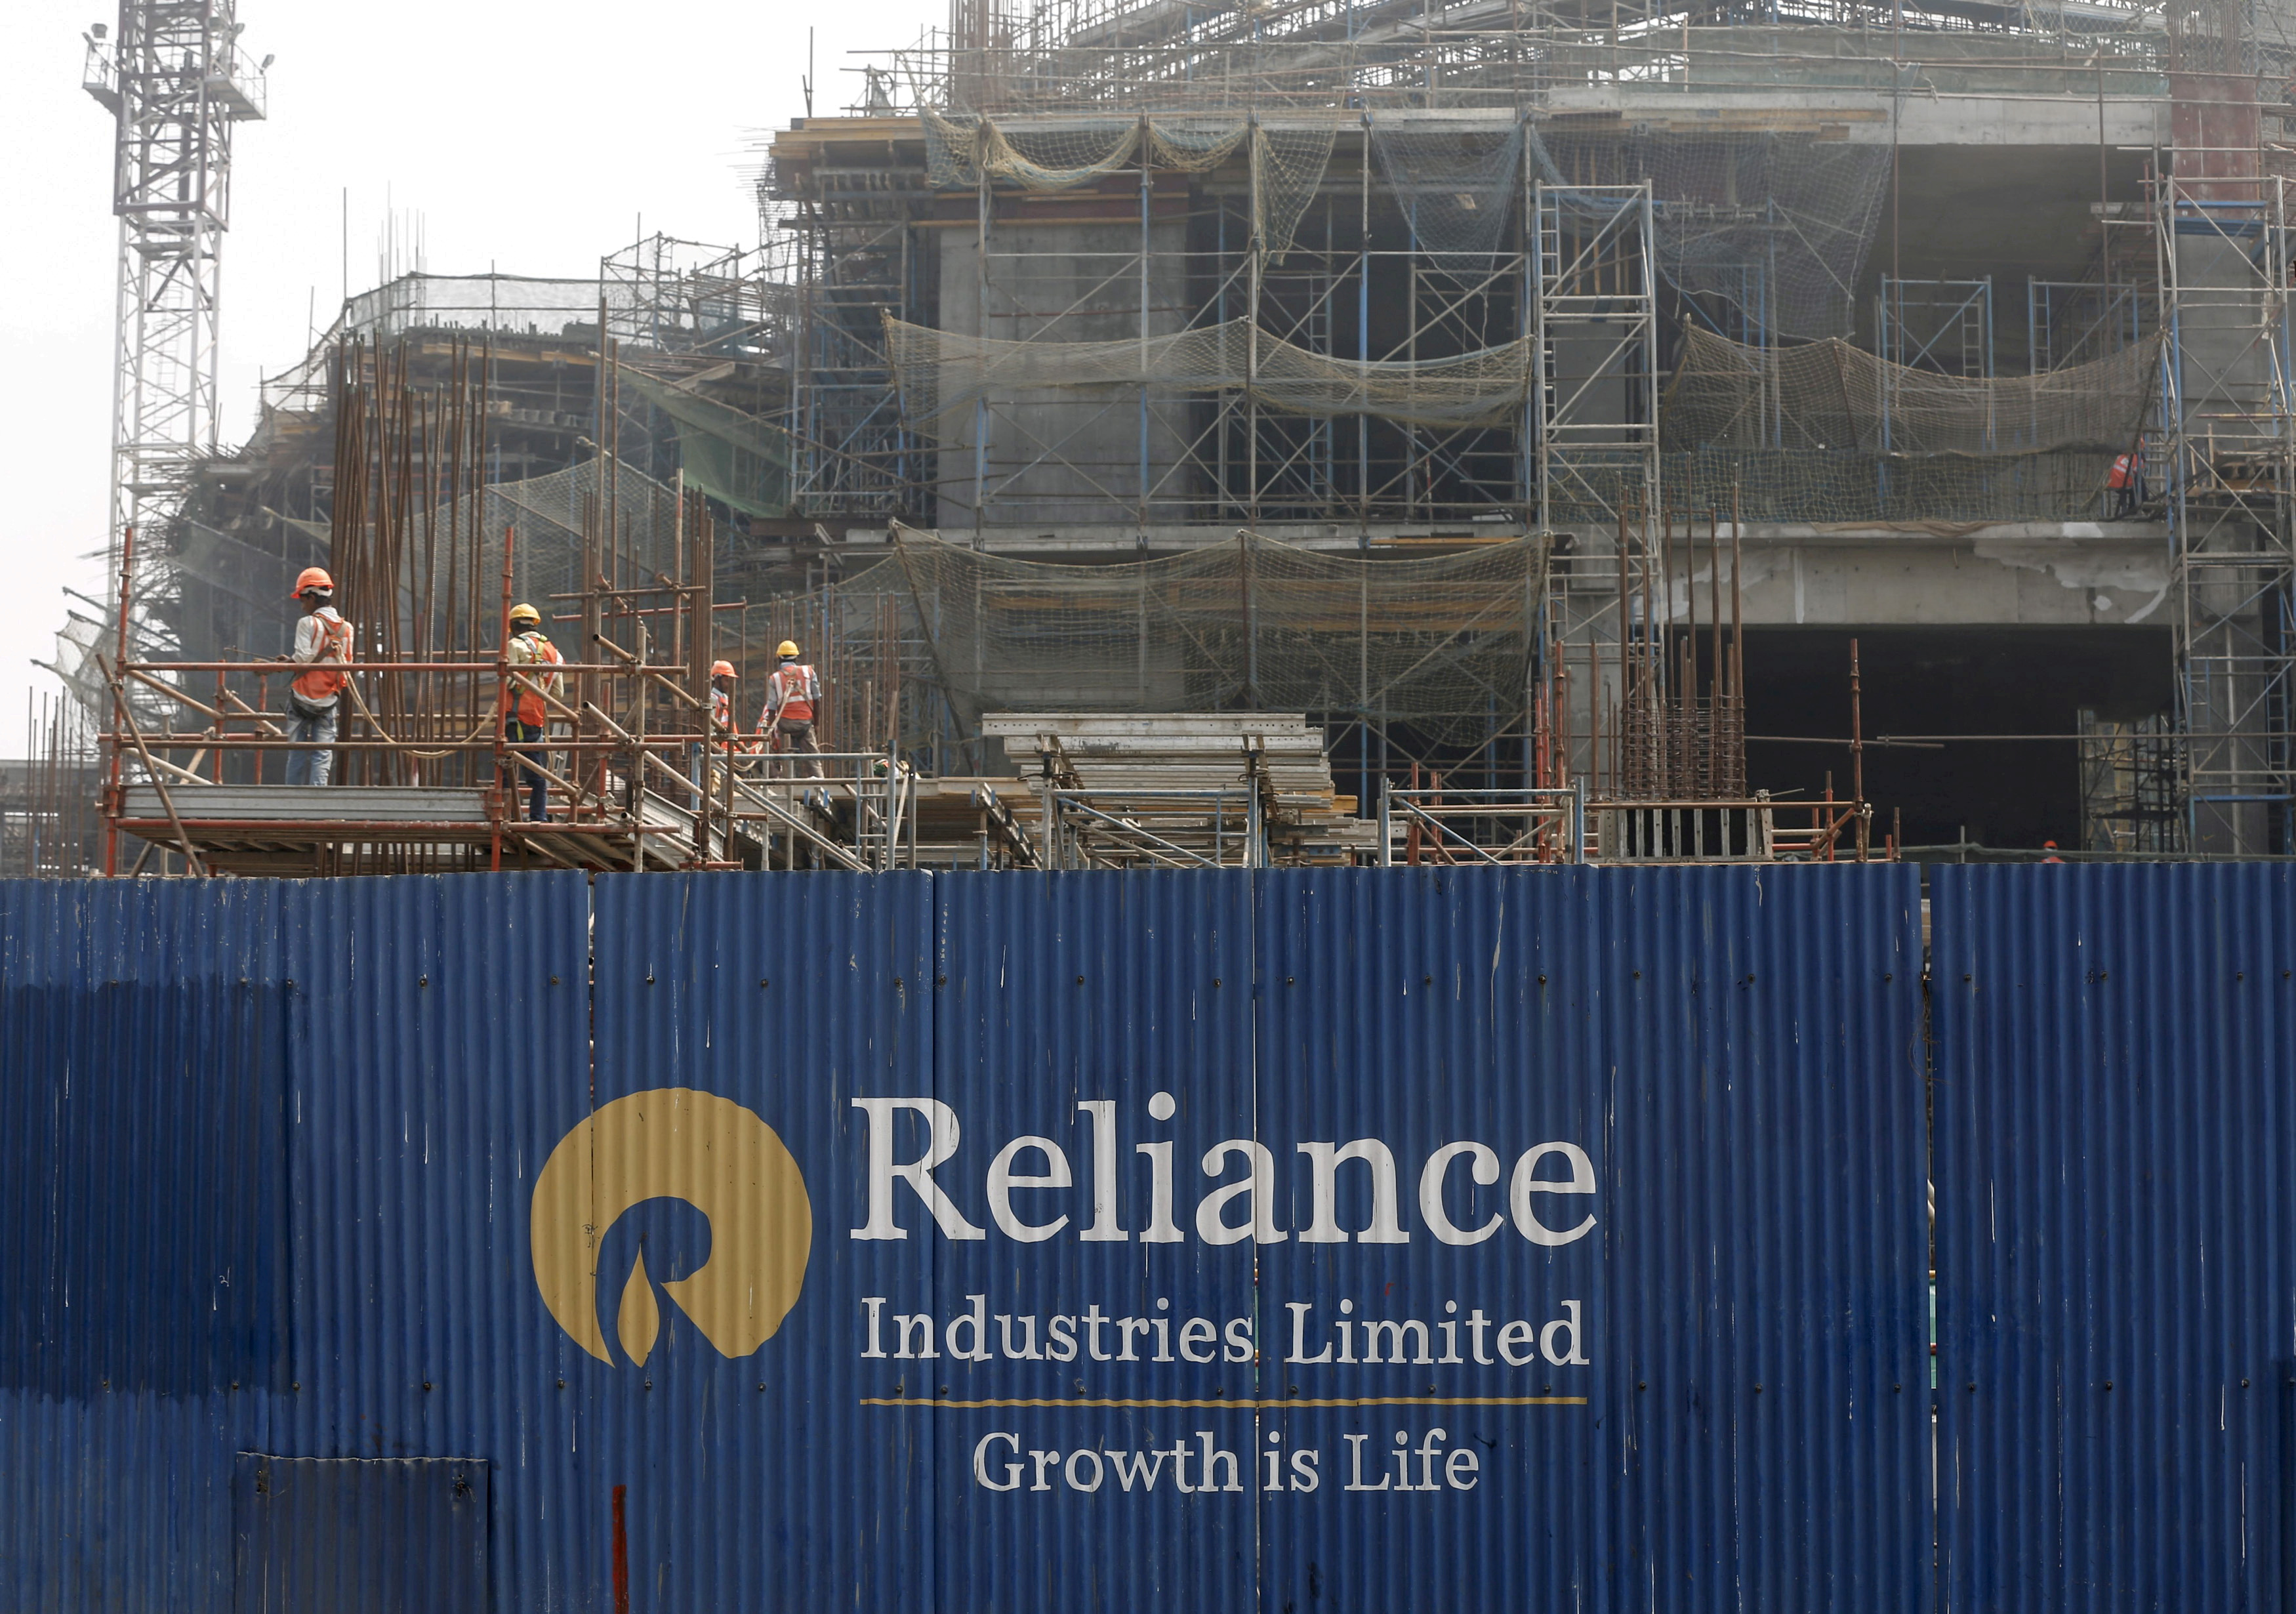 Labourers work behind an advertisement of Reliance Industries Limited at a construction site in Mumbai